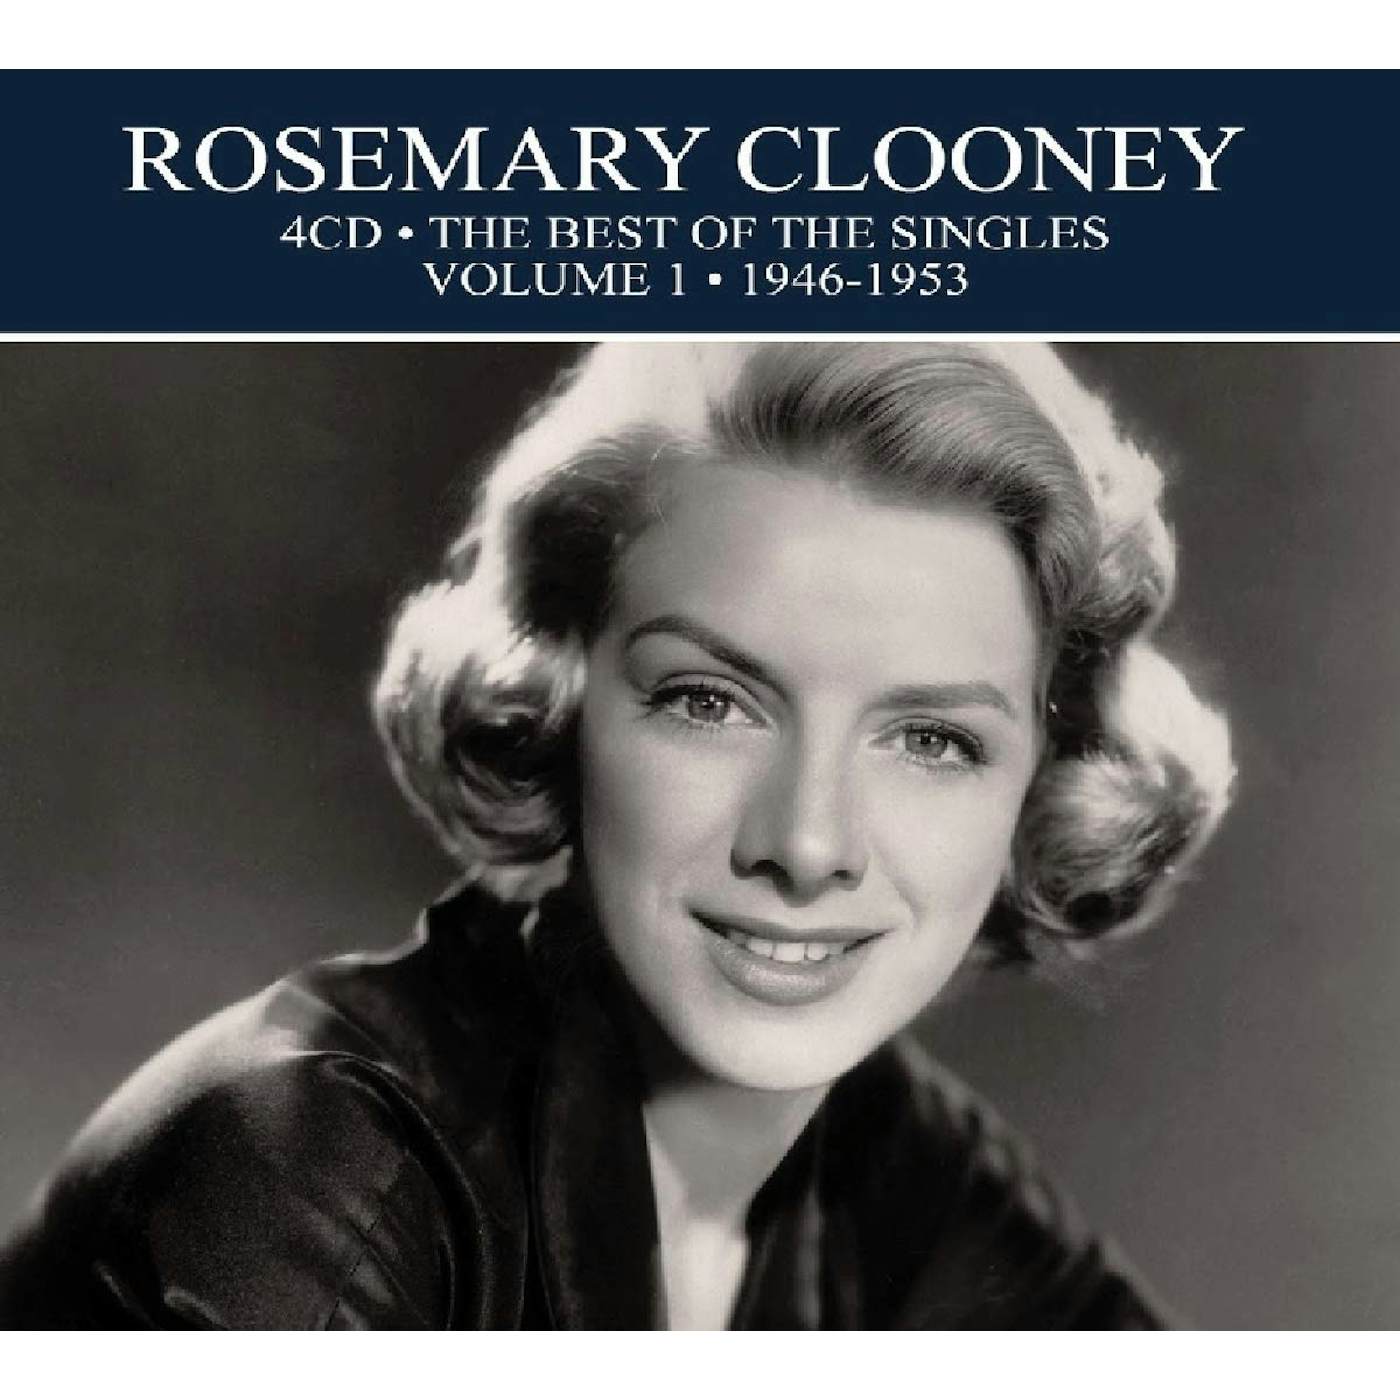 Rosemary Clooney BEST OF THE SINGLES 1946-1953 CD